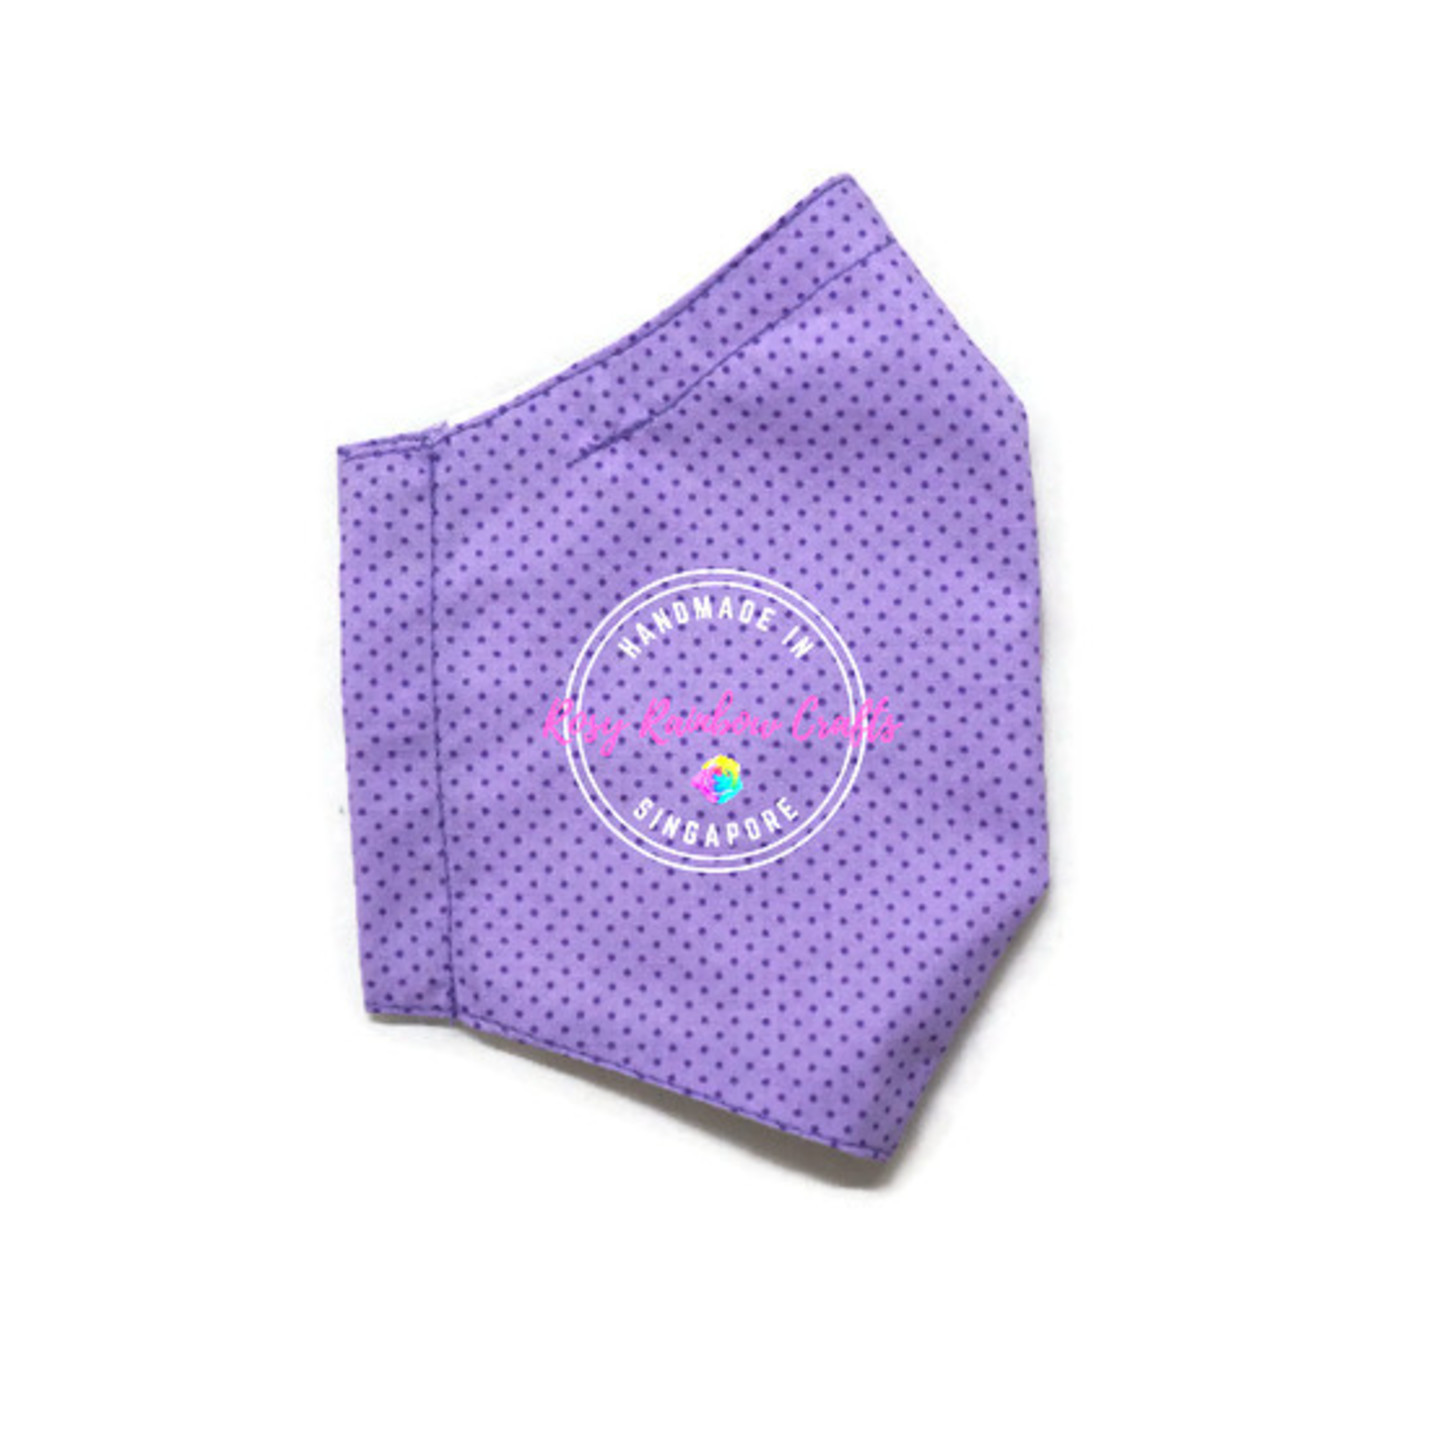 3D Seamless Mask Candy Purple Dots Medium (8-12 years old)